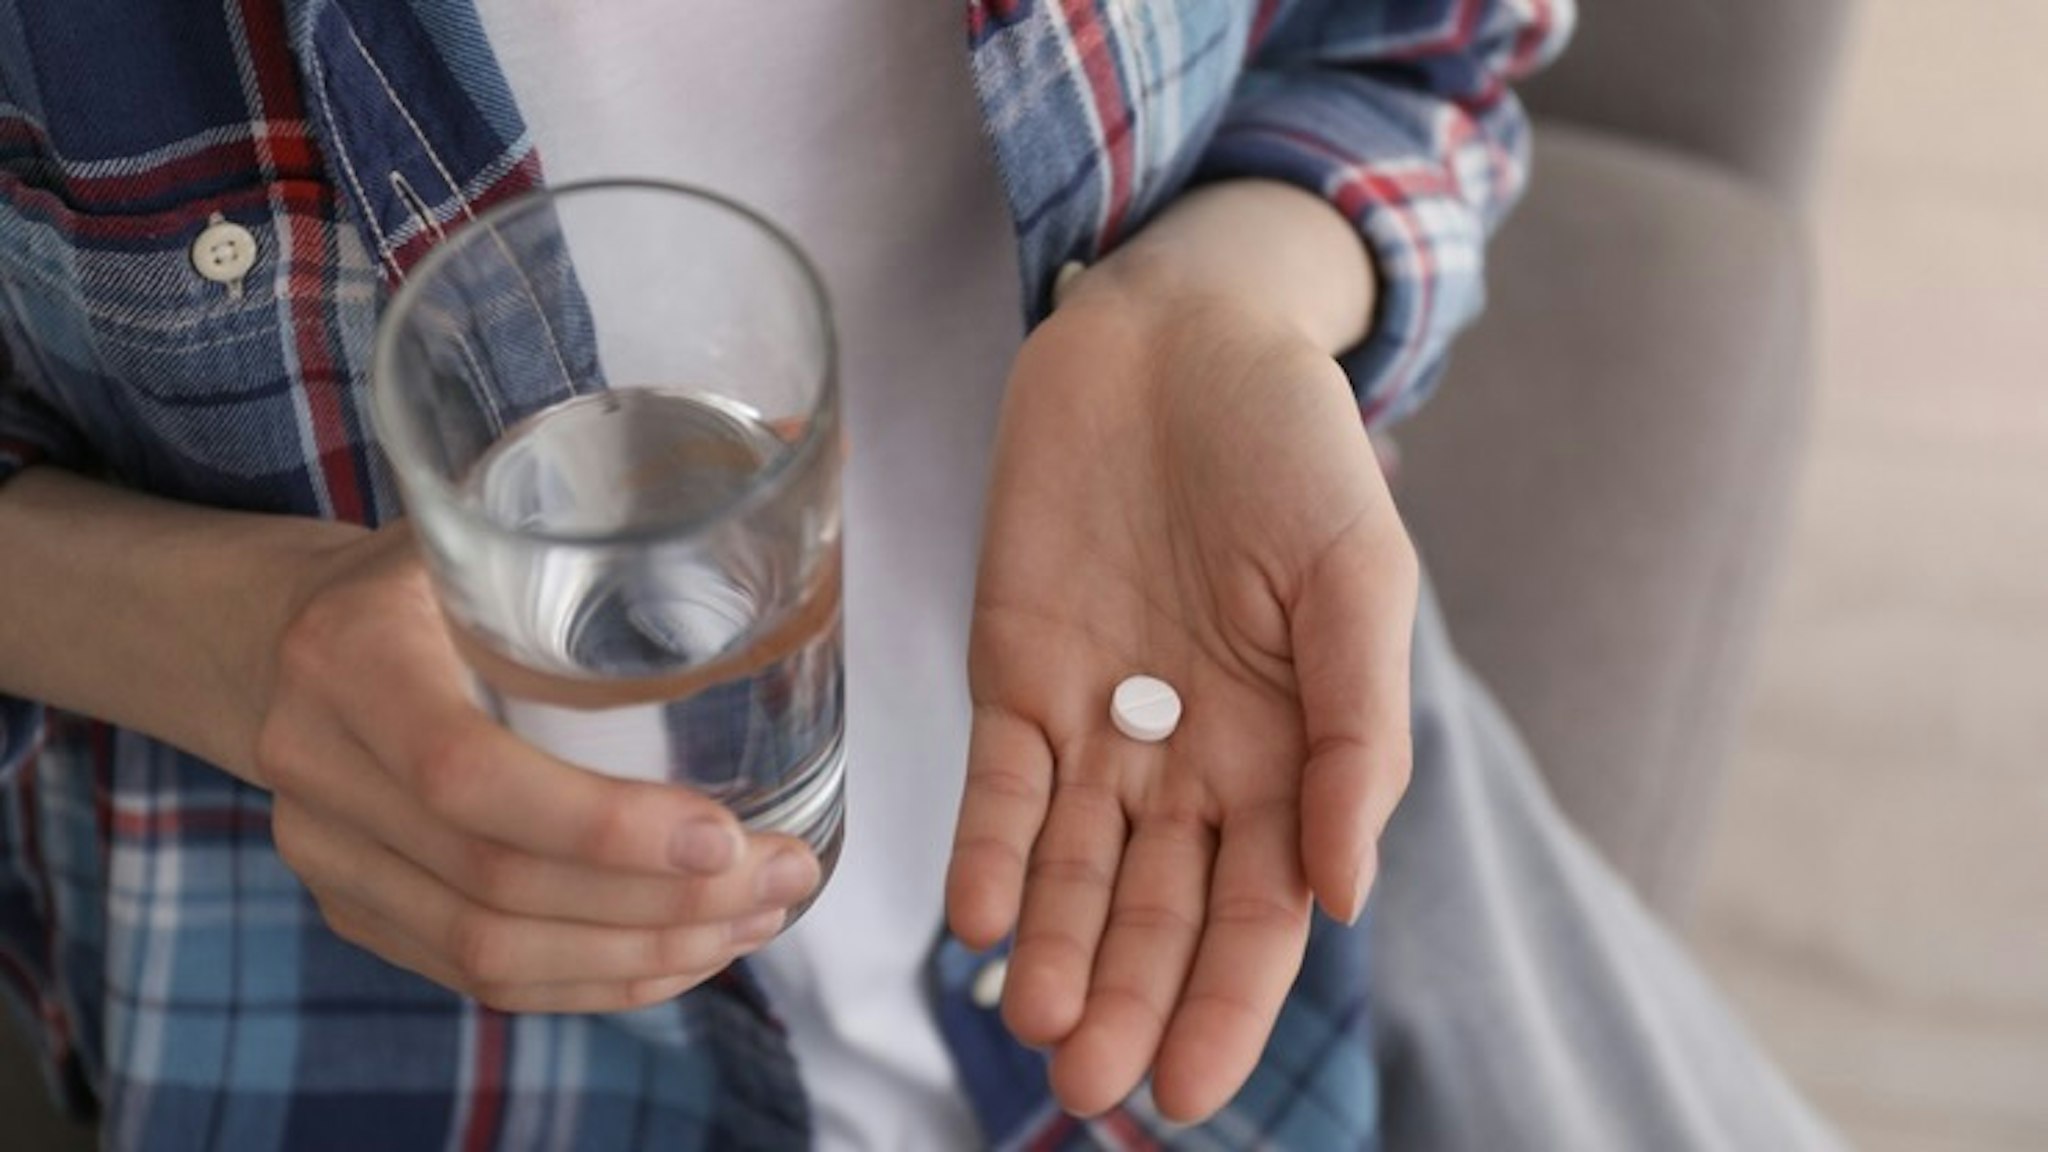 Young woman with abortion pill and glass of water indoors, closeup - stock photo Young woman with abortion pill and glass of water indoors, closeup Liudmila Chernetska via Getty Images